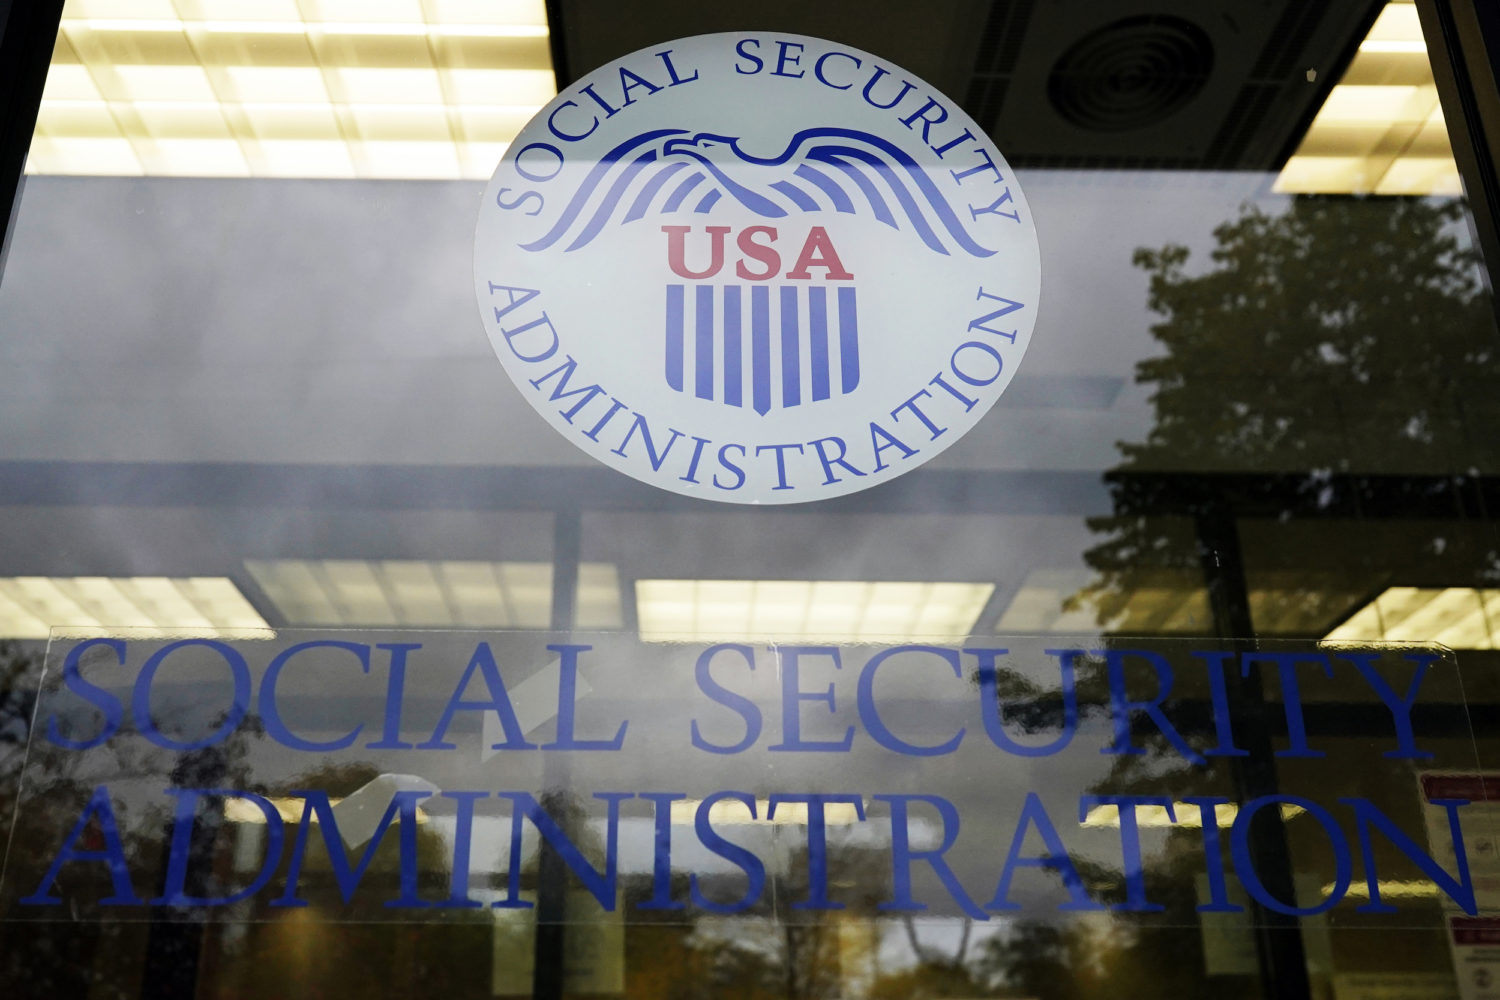 Social Security does add to federal budget deficit, despite claims to the contrary